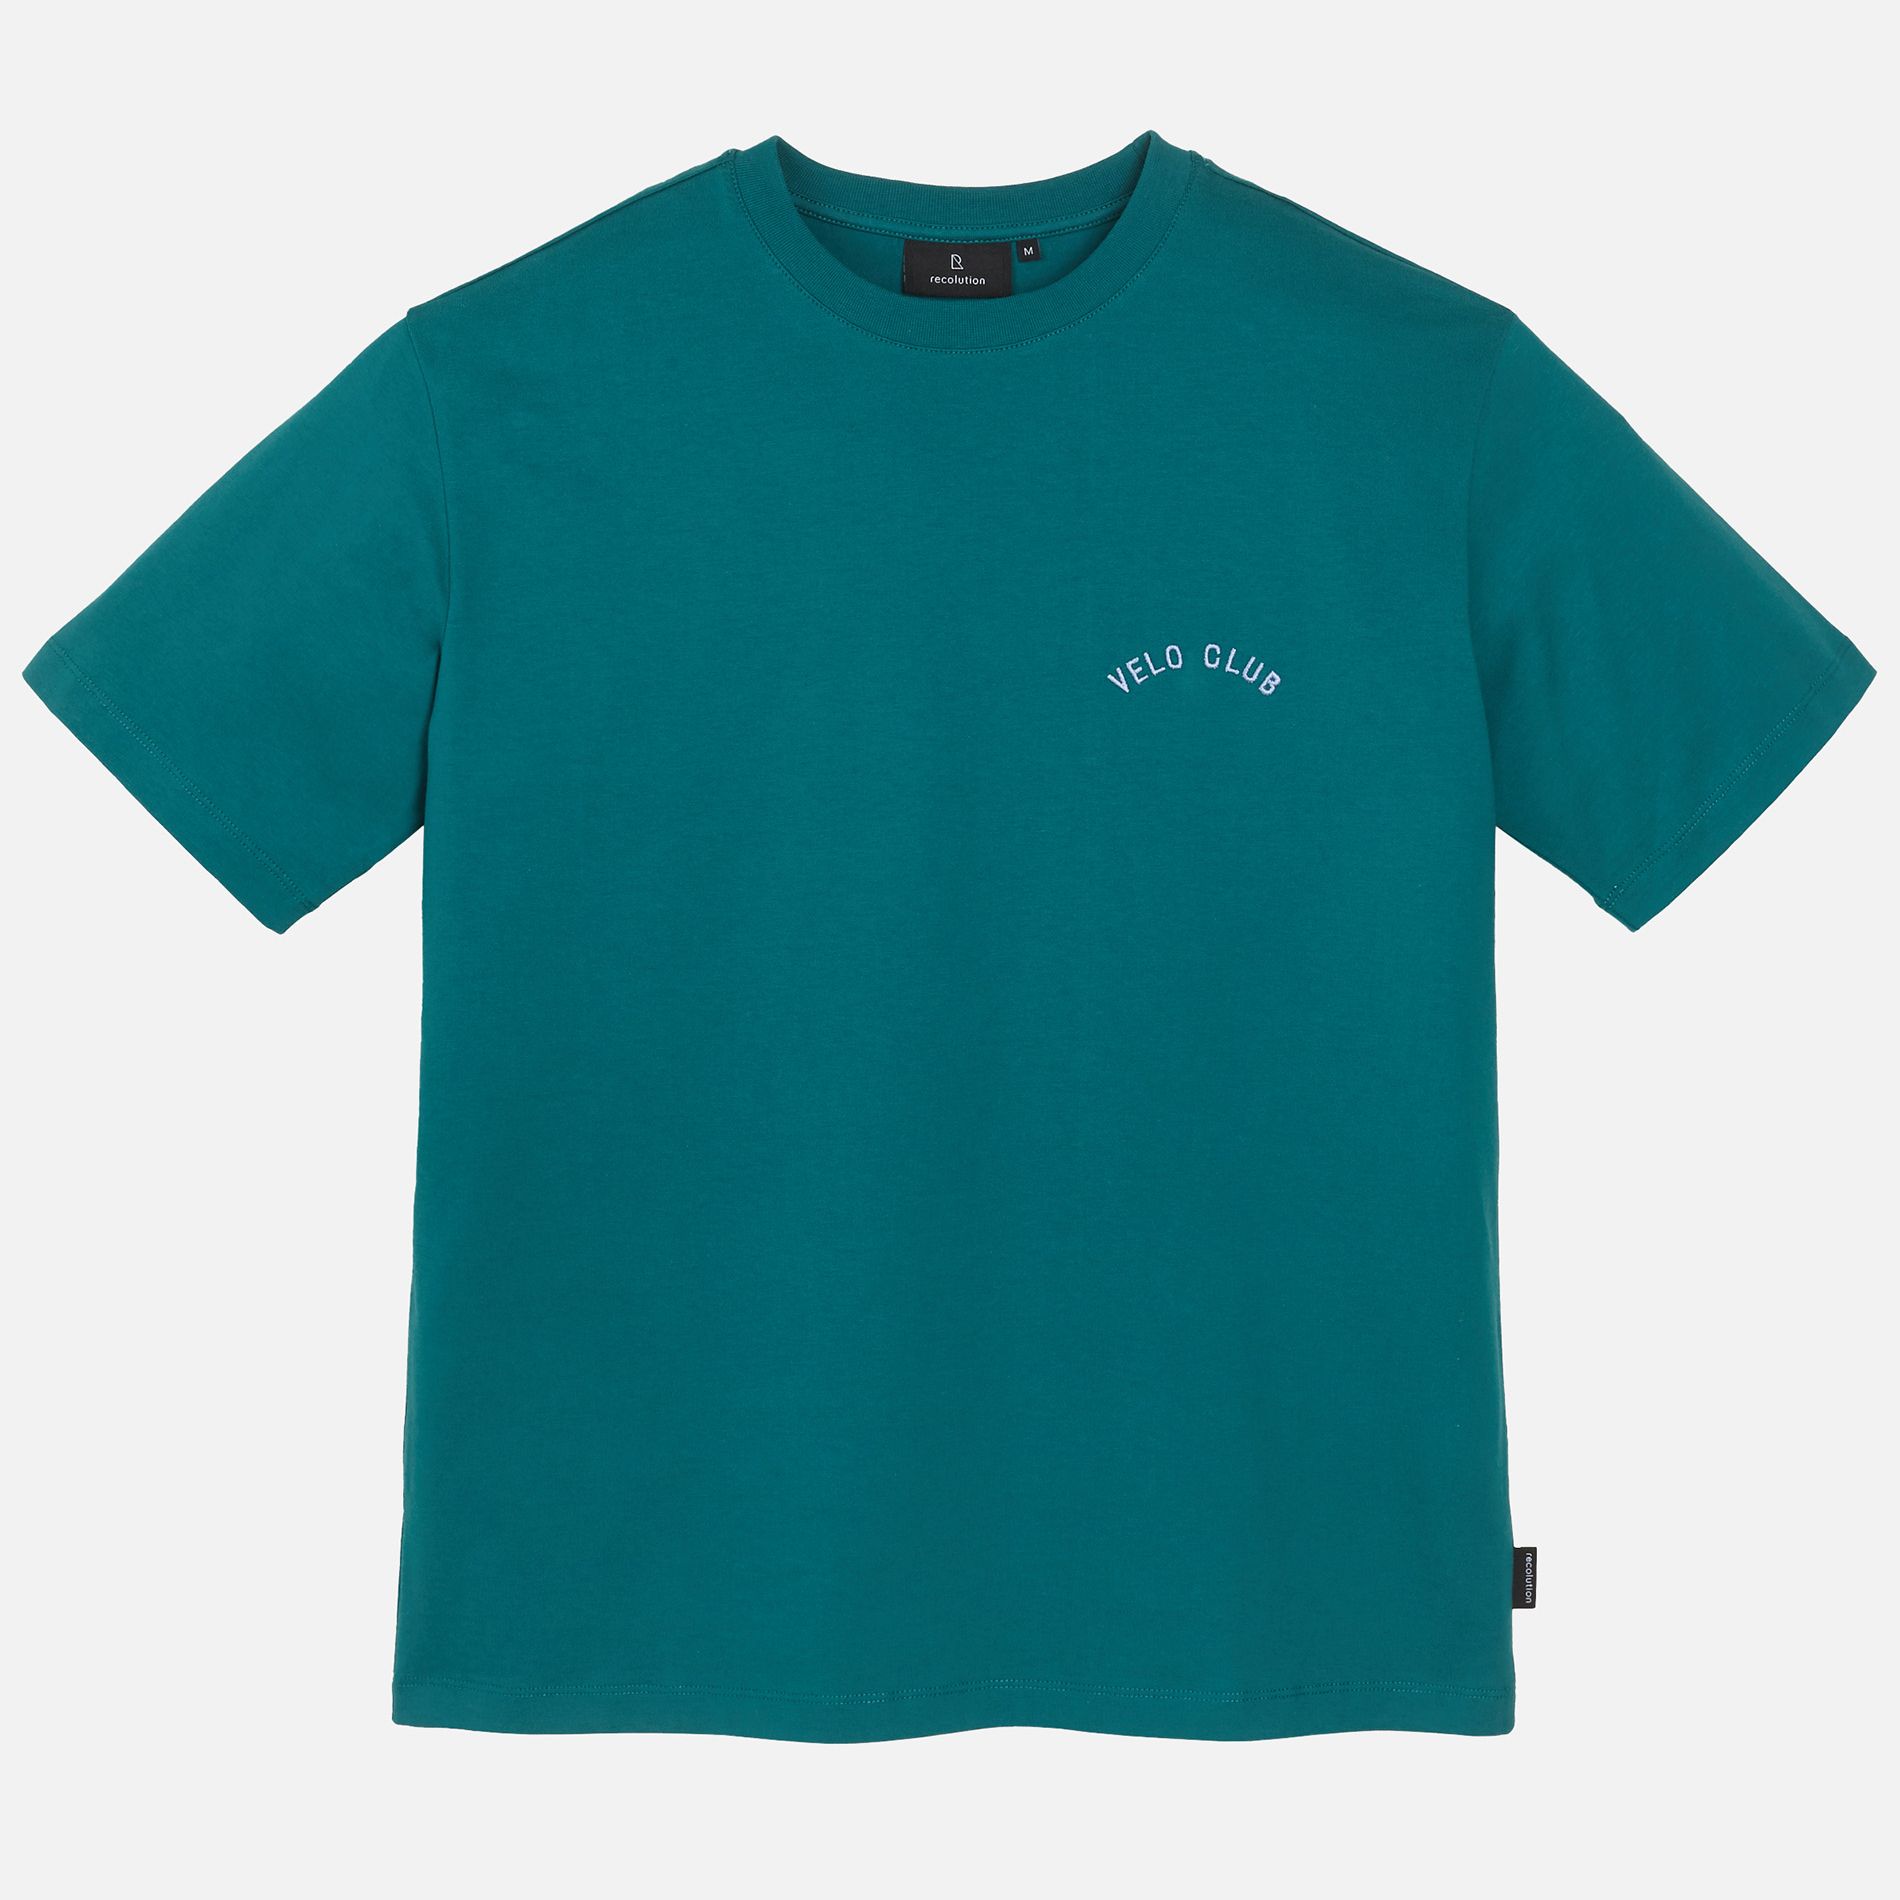 T-Shirt APOSERIS VELO CLUB forest green